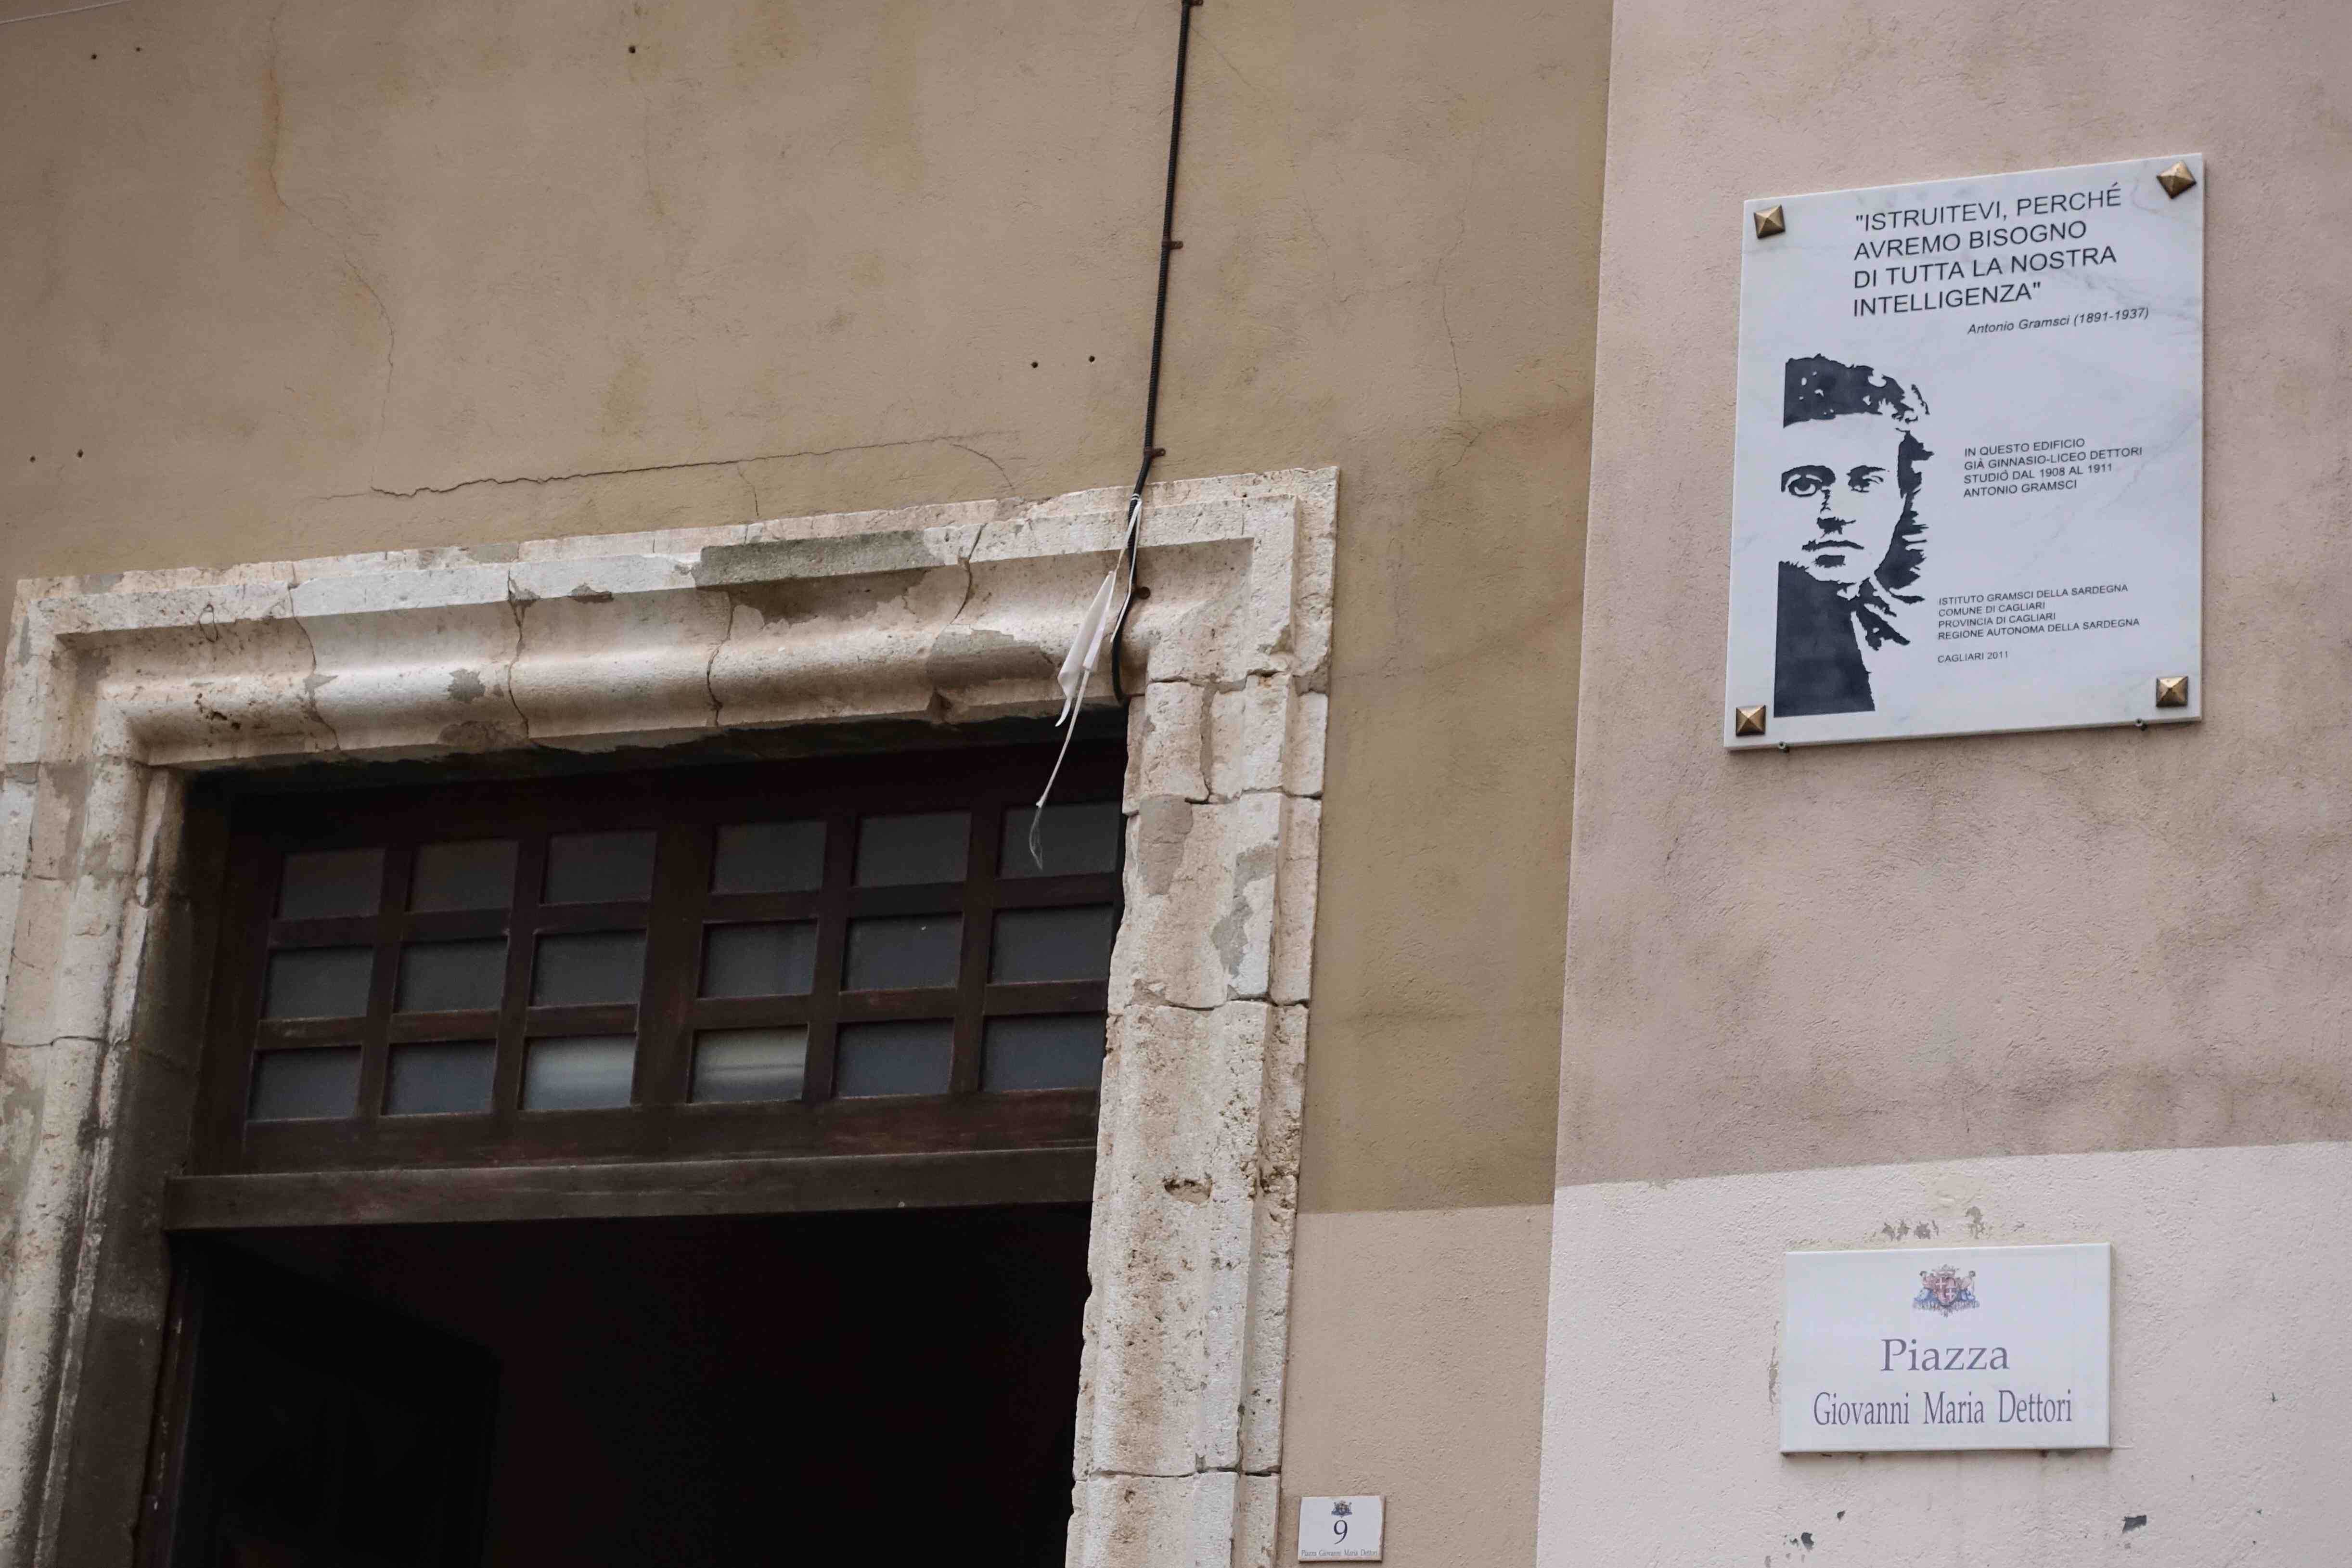 Antonio Gramsci's secondary school in Cagliara. The plaque reads,  "Educate yourselves because we'll need all our intelligence." Photo by Linda Herrera. From: http://www.middleeastdigest.com/pages/index/26685/reminiscing-gramsci